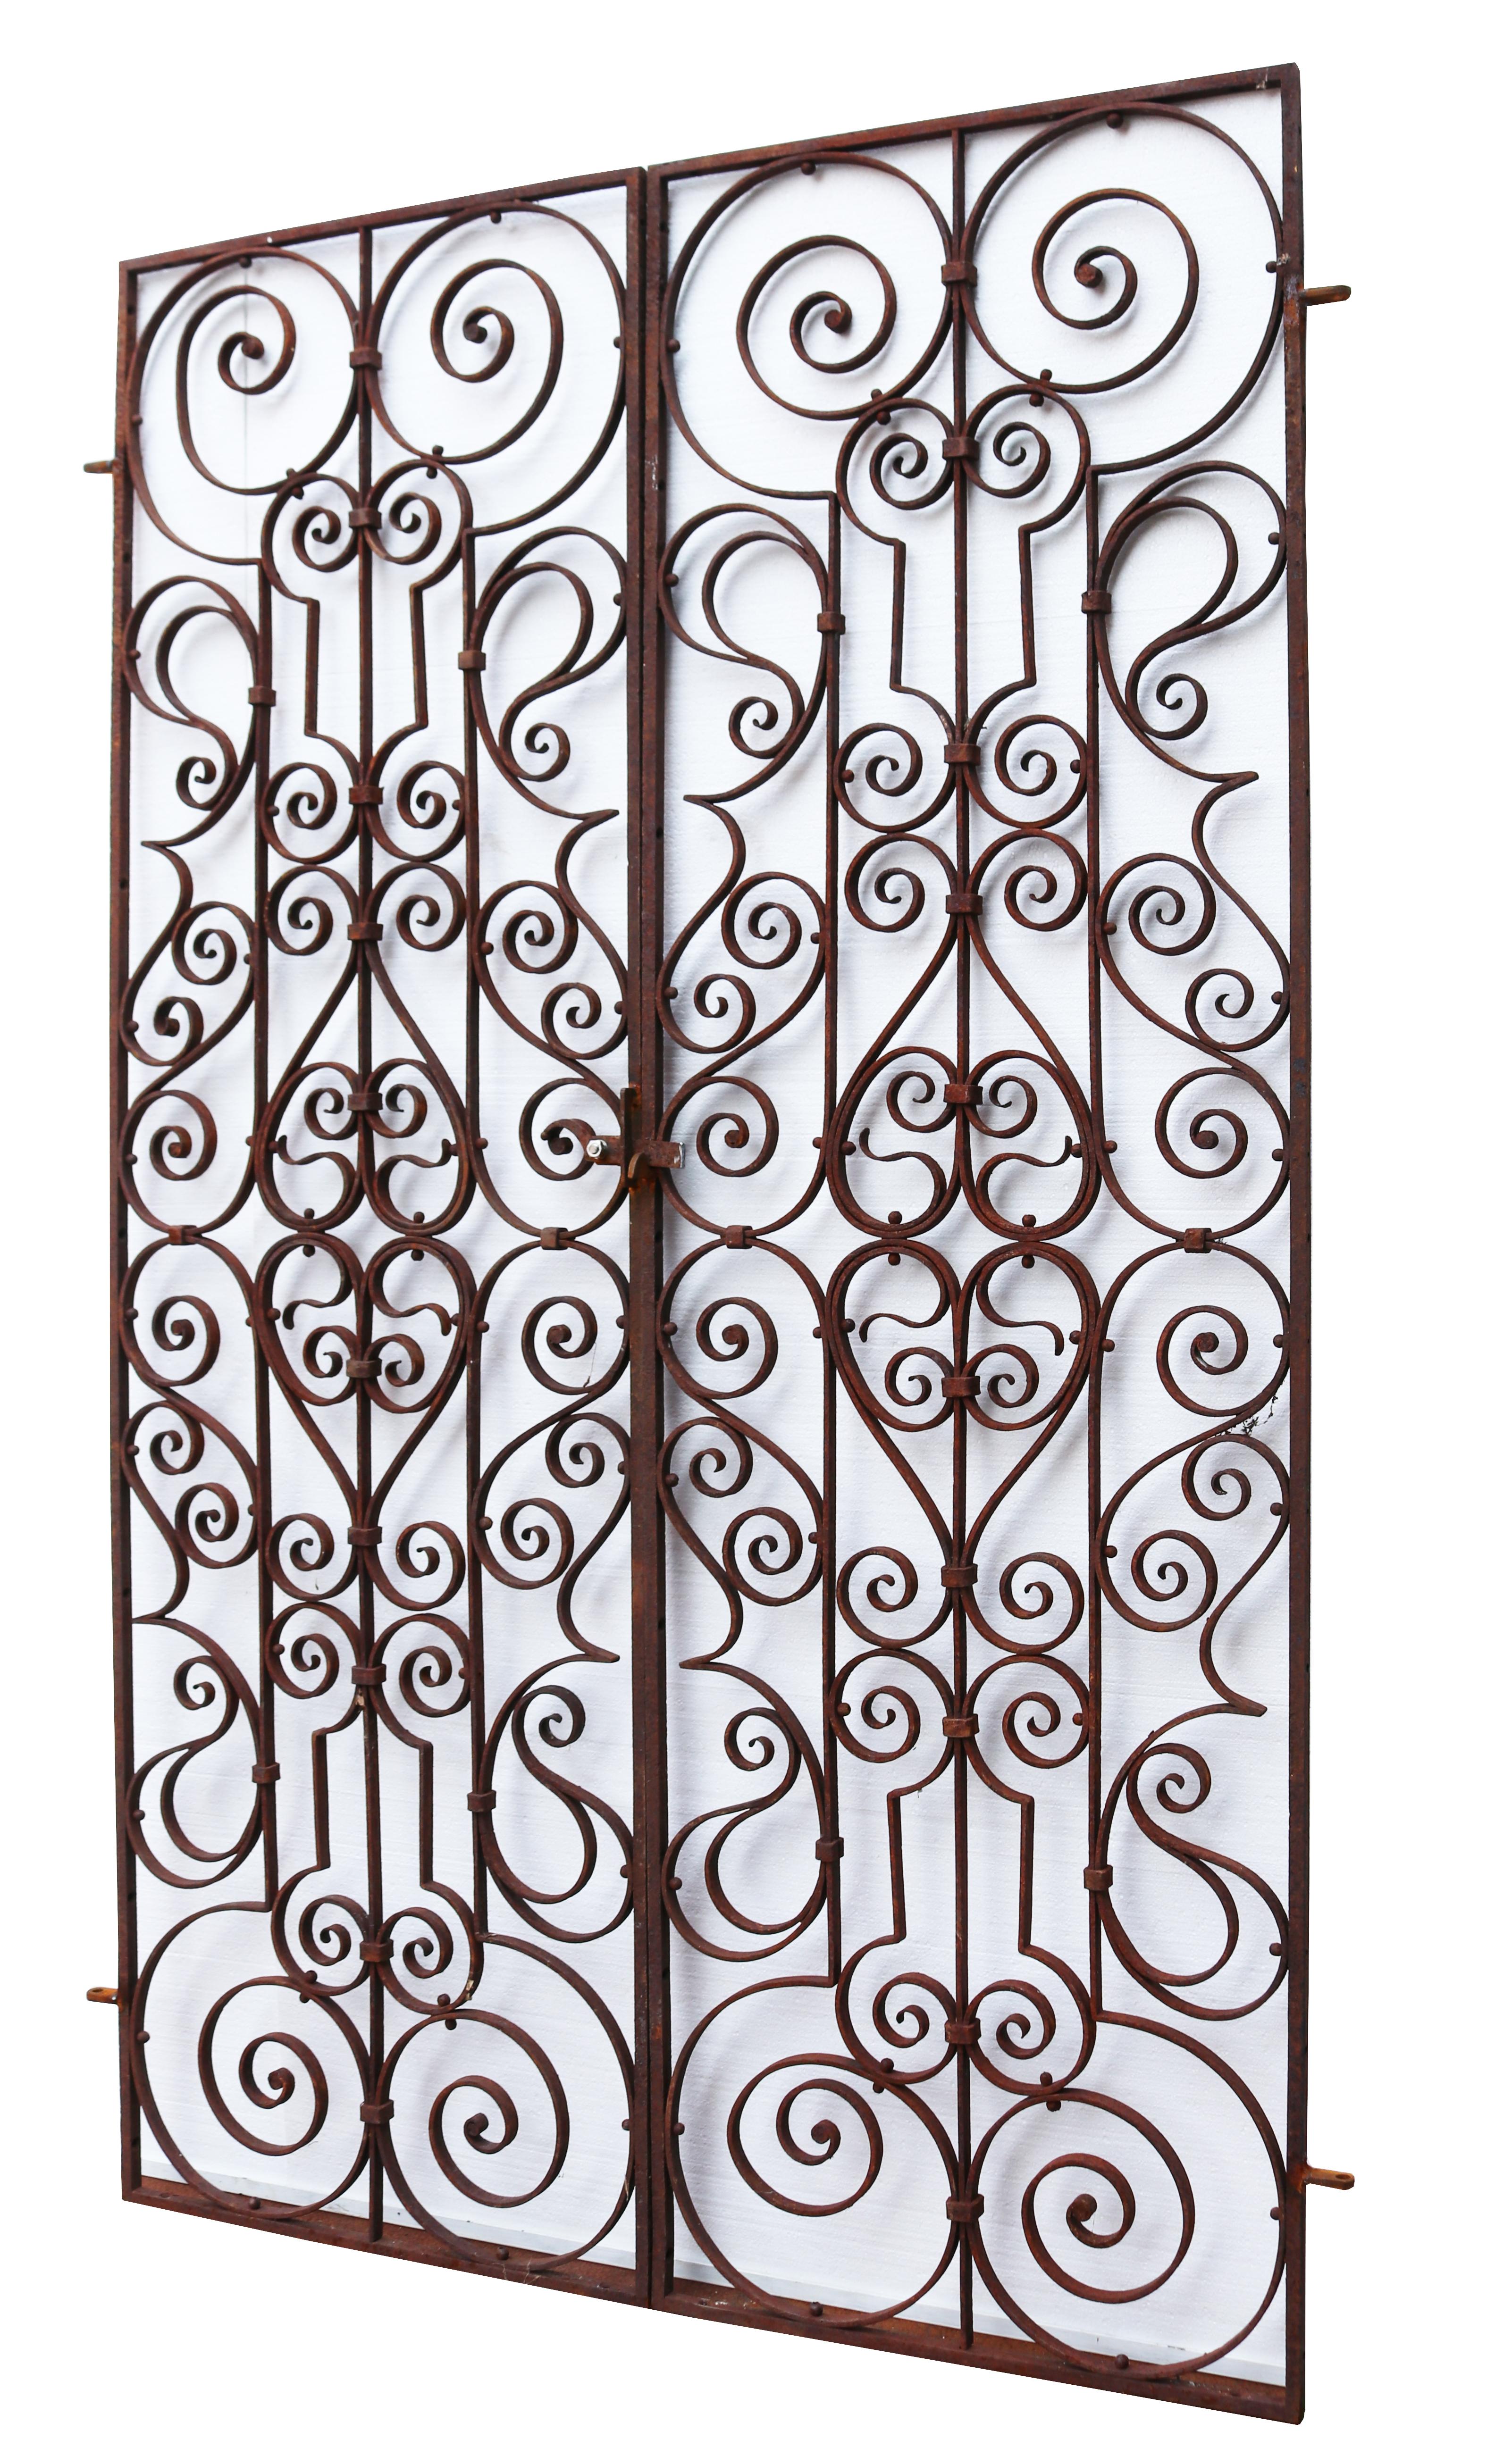 A pair of large reclaimed early 19th century iron gates with a scrolling pattern

Additional Dimensions

To fit an opening of approximately 149 cm